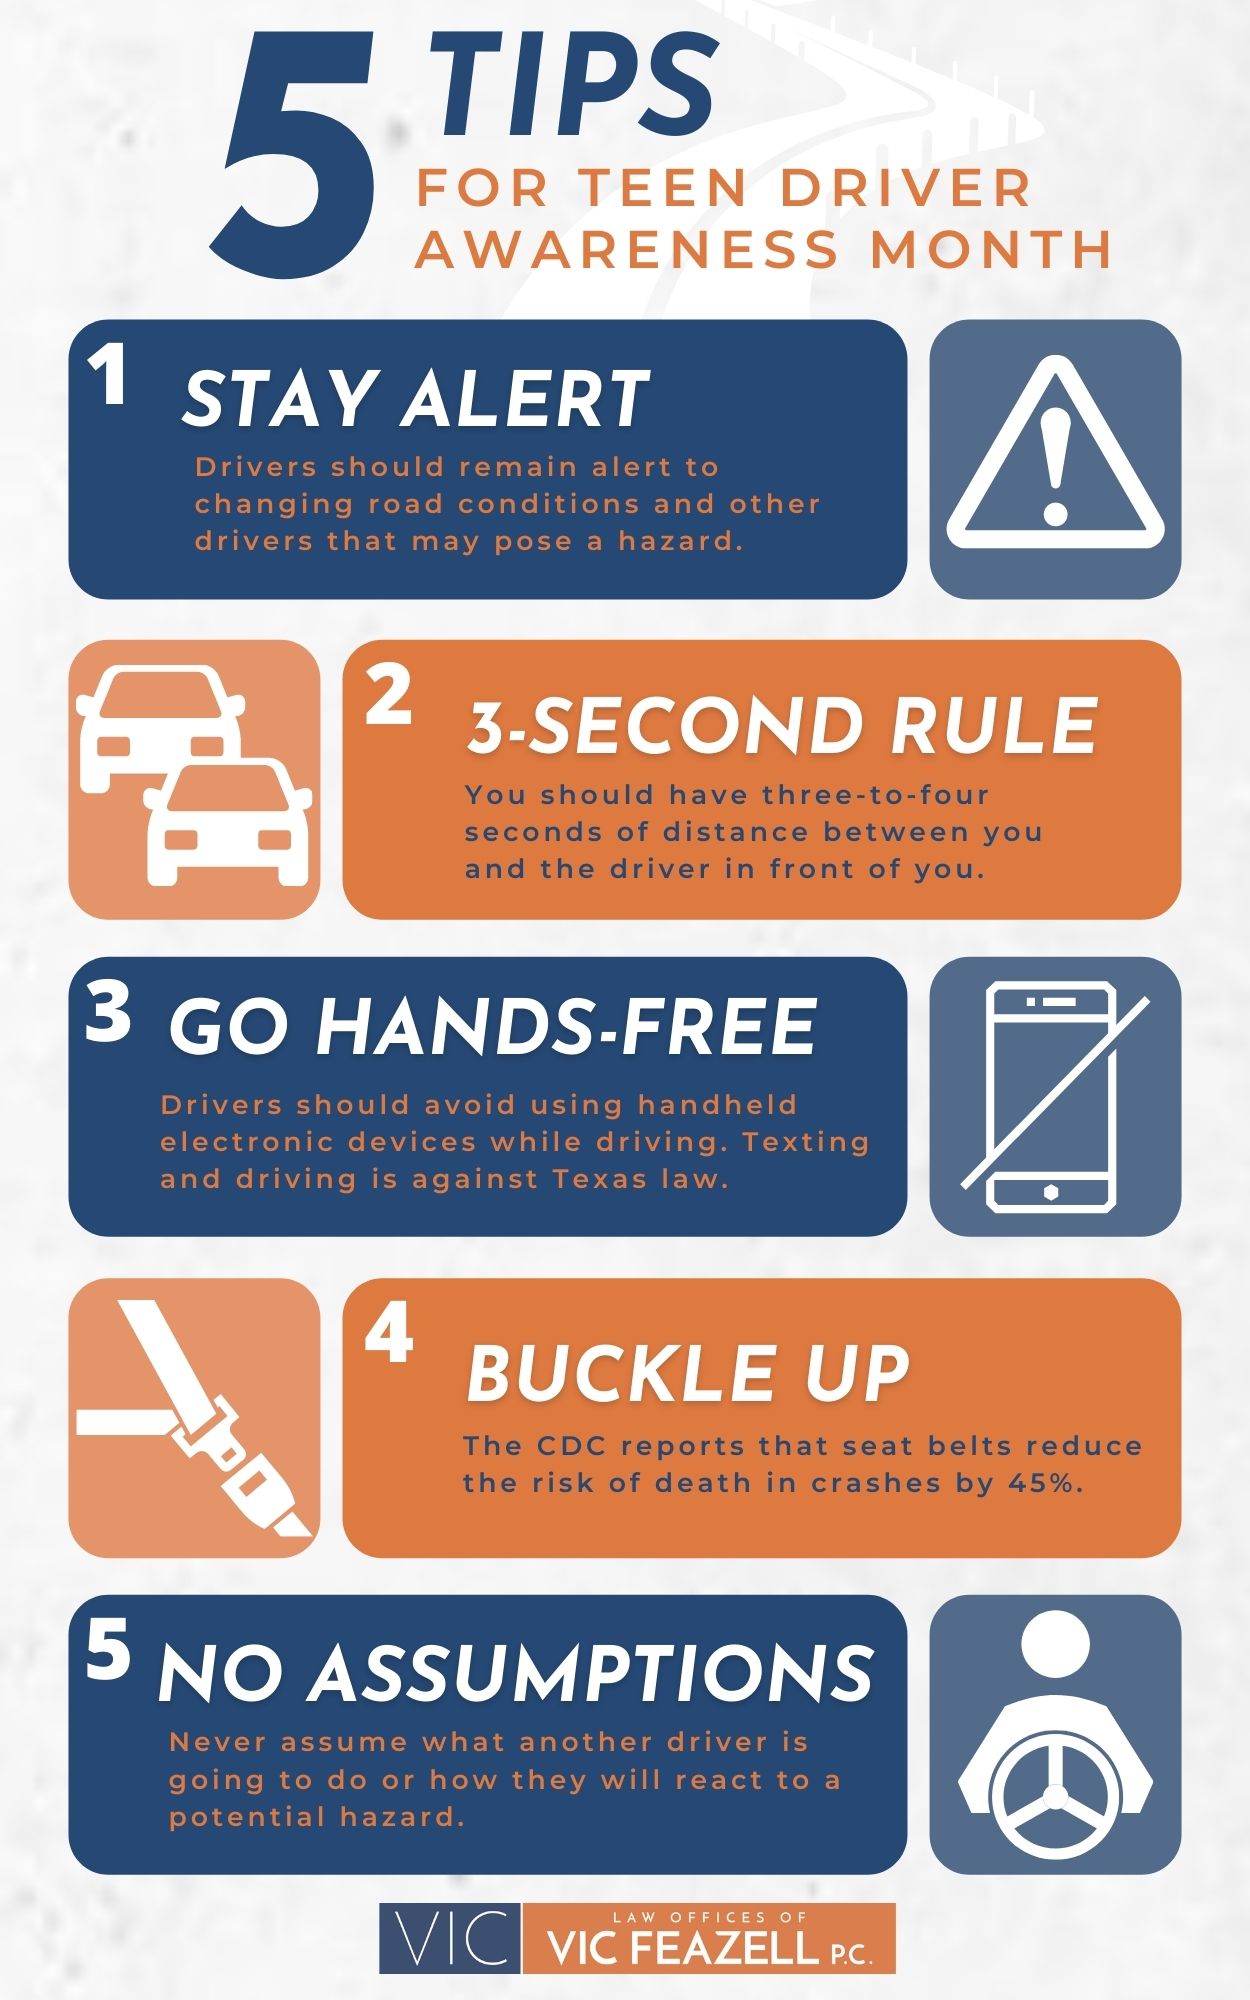 5 Tips for Teen Driving Awareness Month [Infographic]